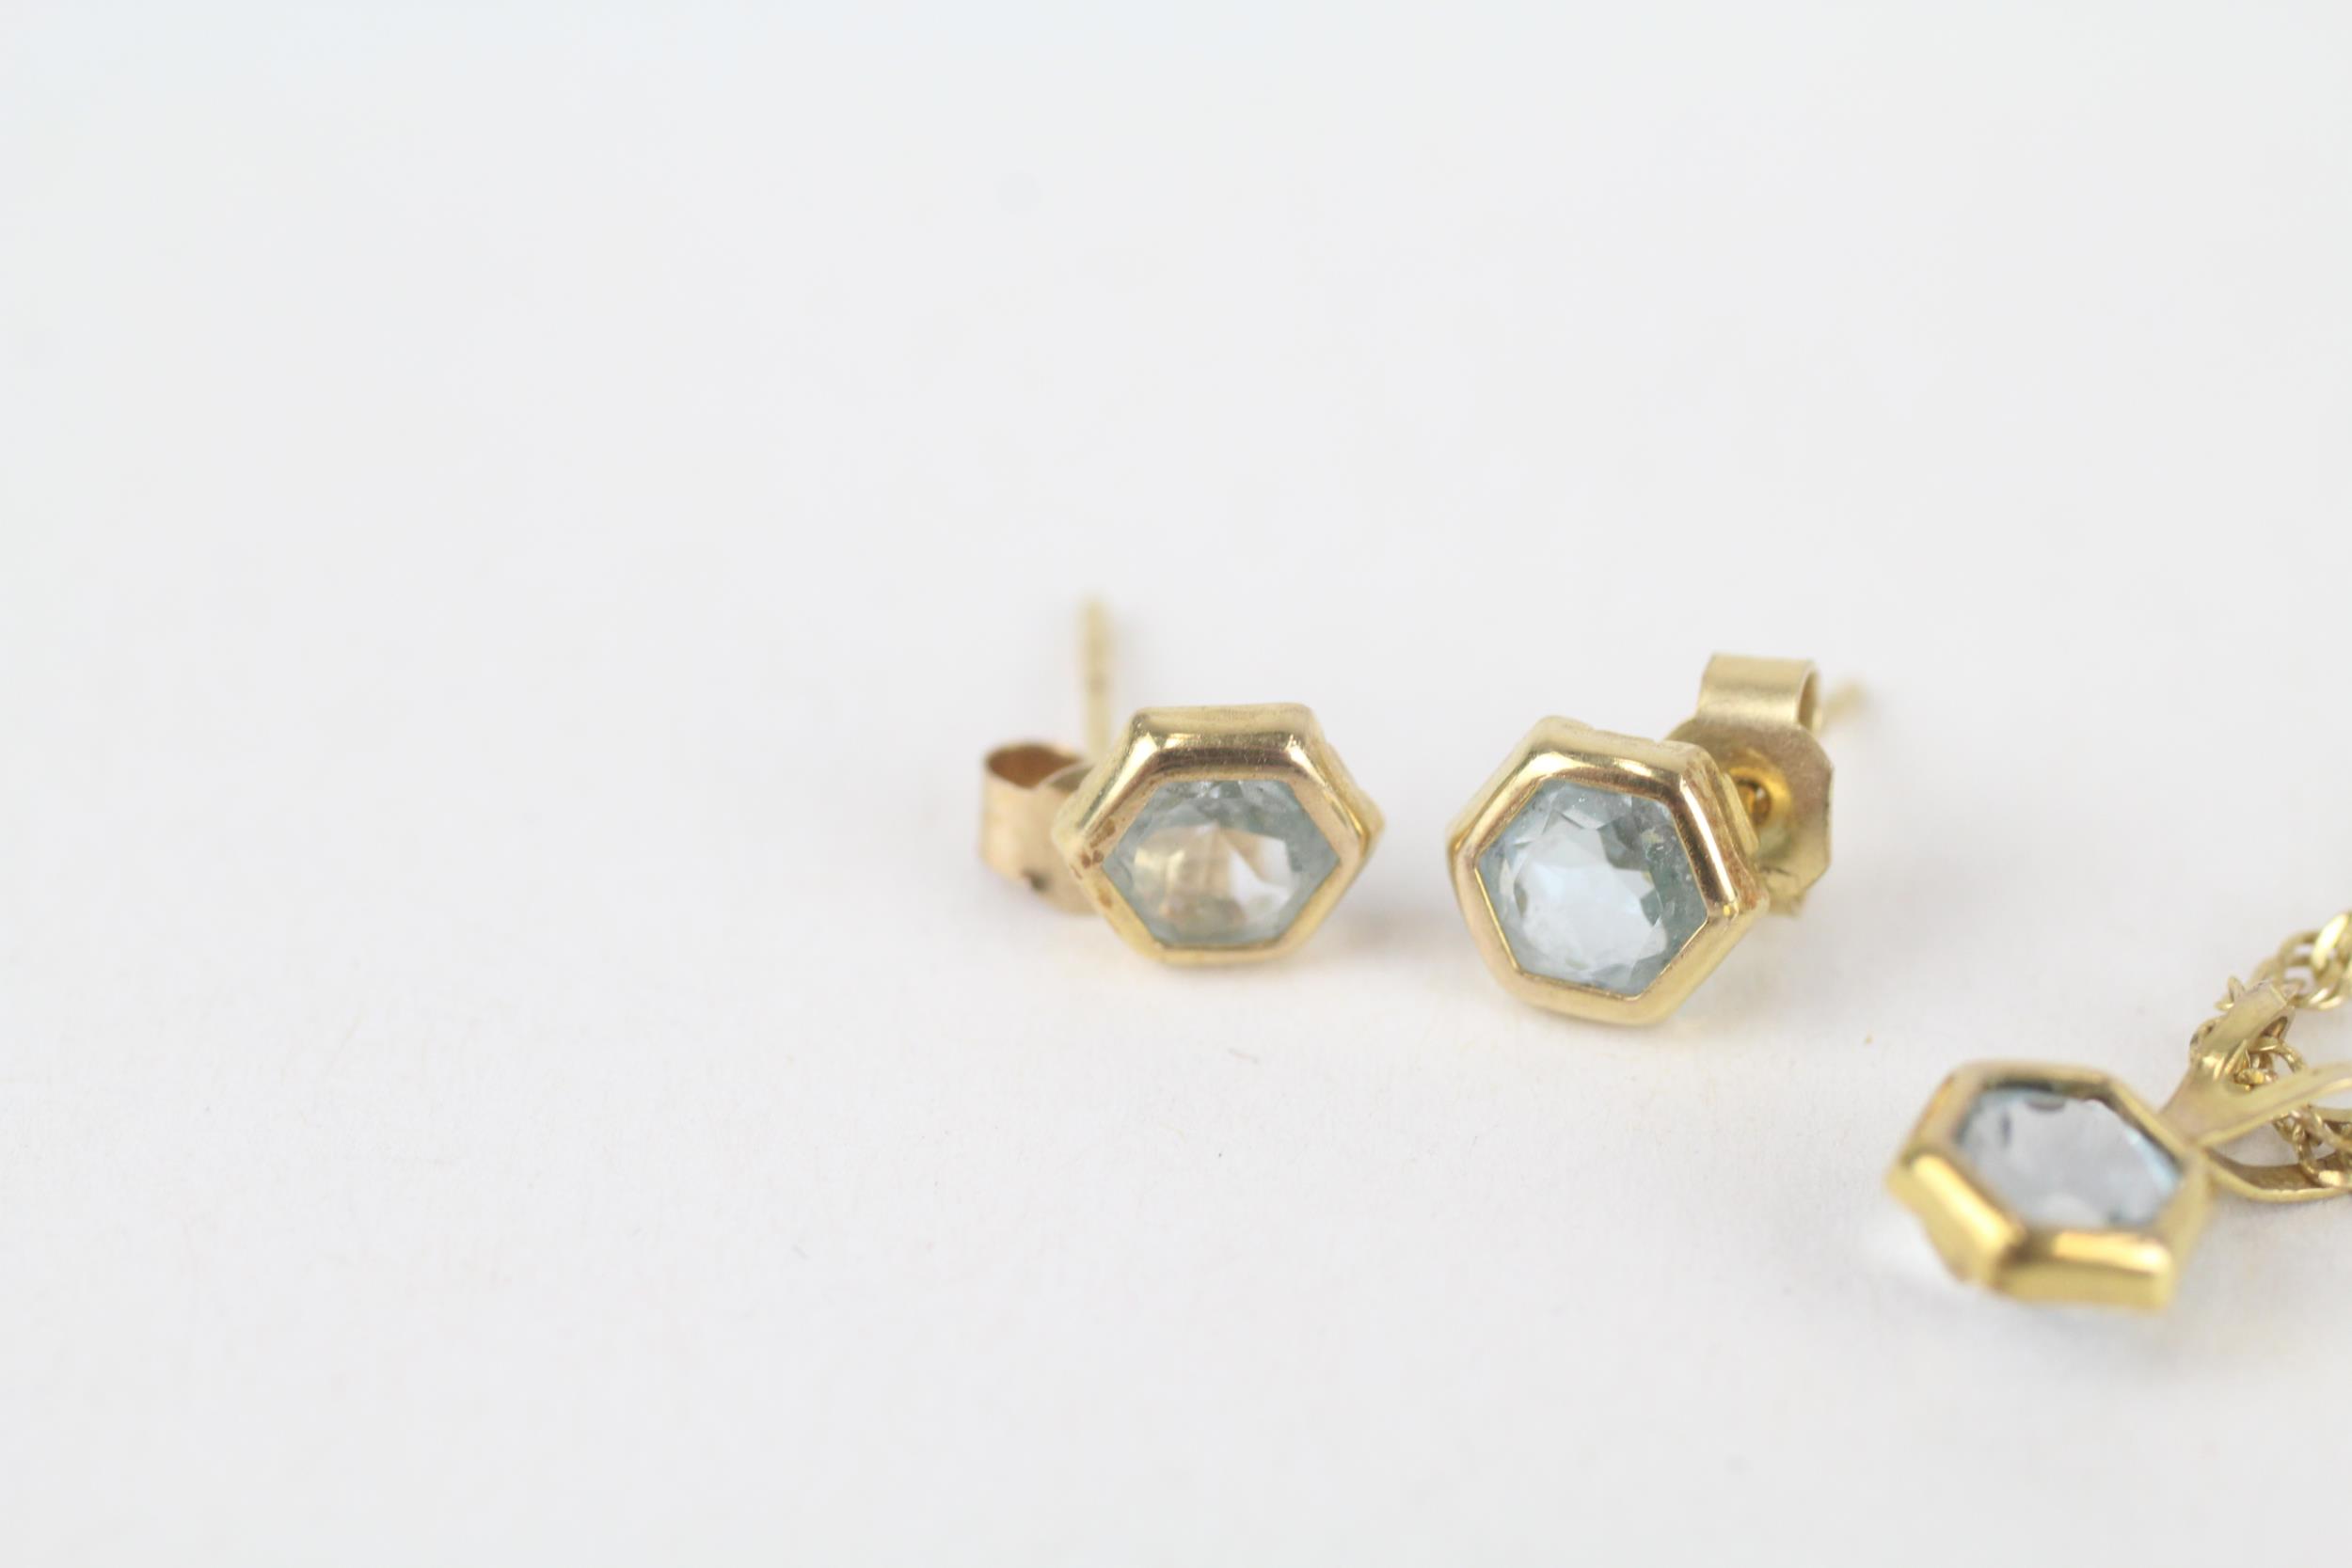 2x 9ct gold hexagon cut blue topaz necklace & stud earrings 2.6 g - Image 2 of 5